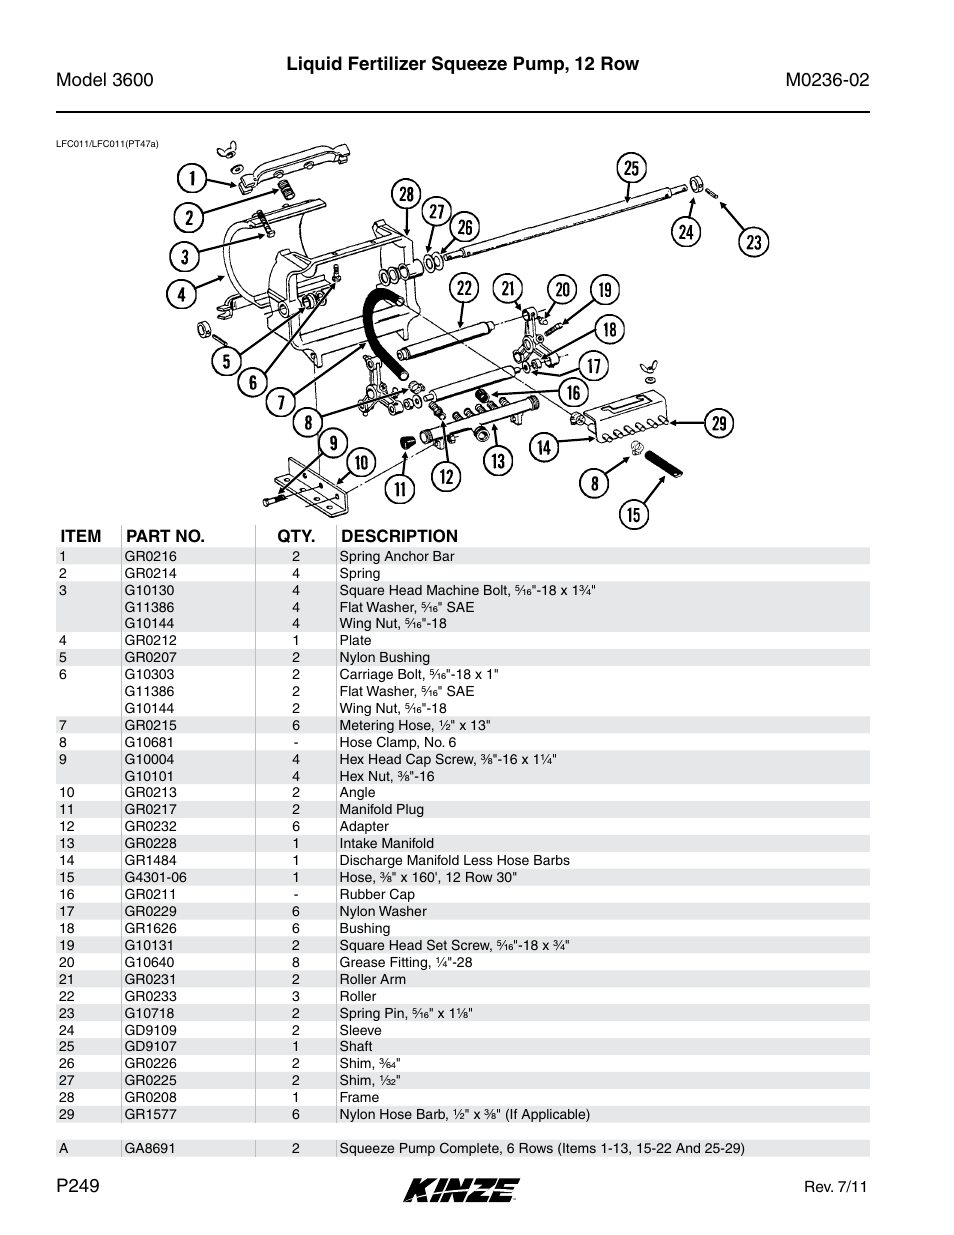 Liquid fertilizer squeeze pump, 12 row | Kinze 3600 Lift and Rotate Planter Rev. 5/14 User Manual | Page 252 / 302